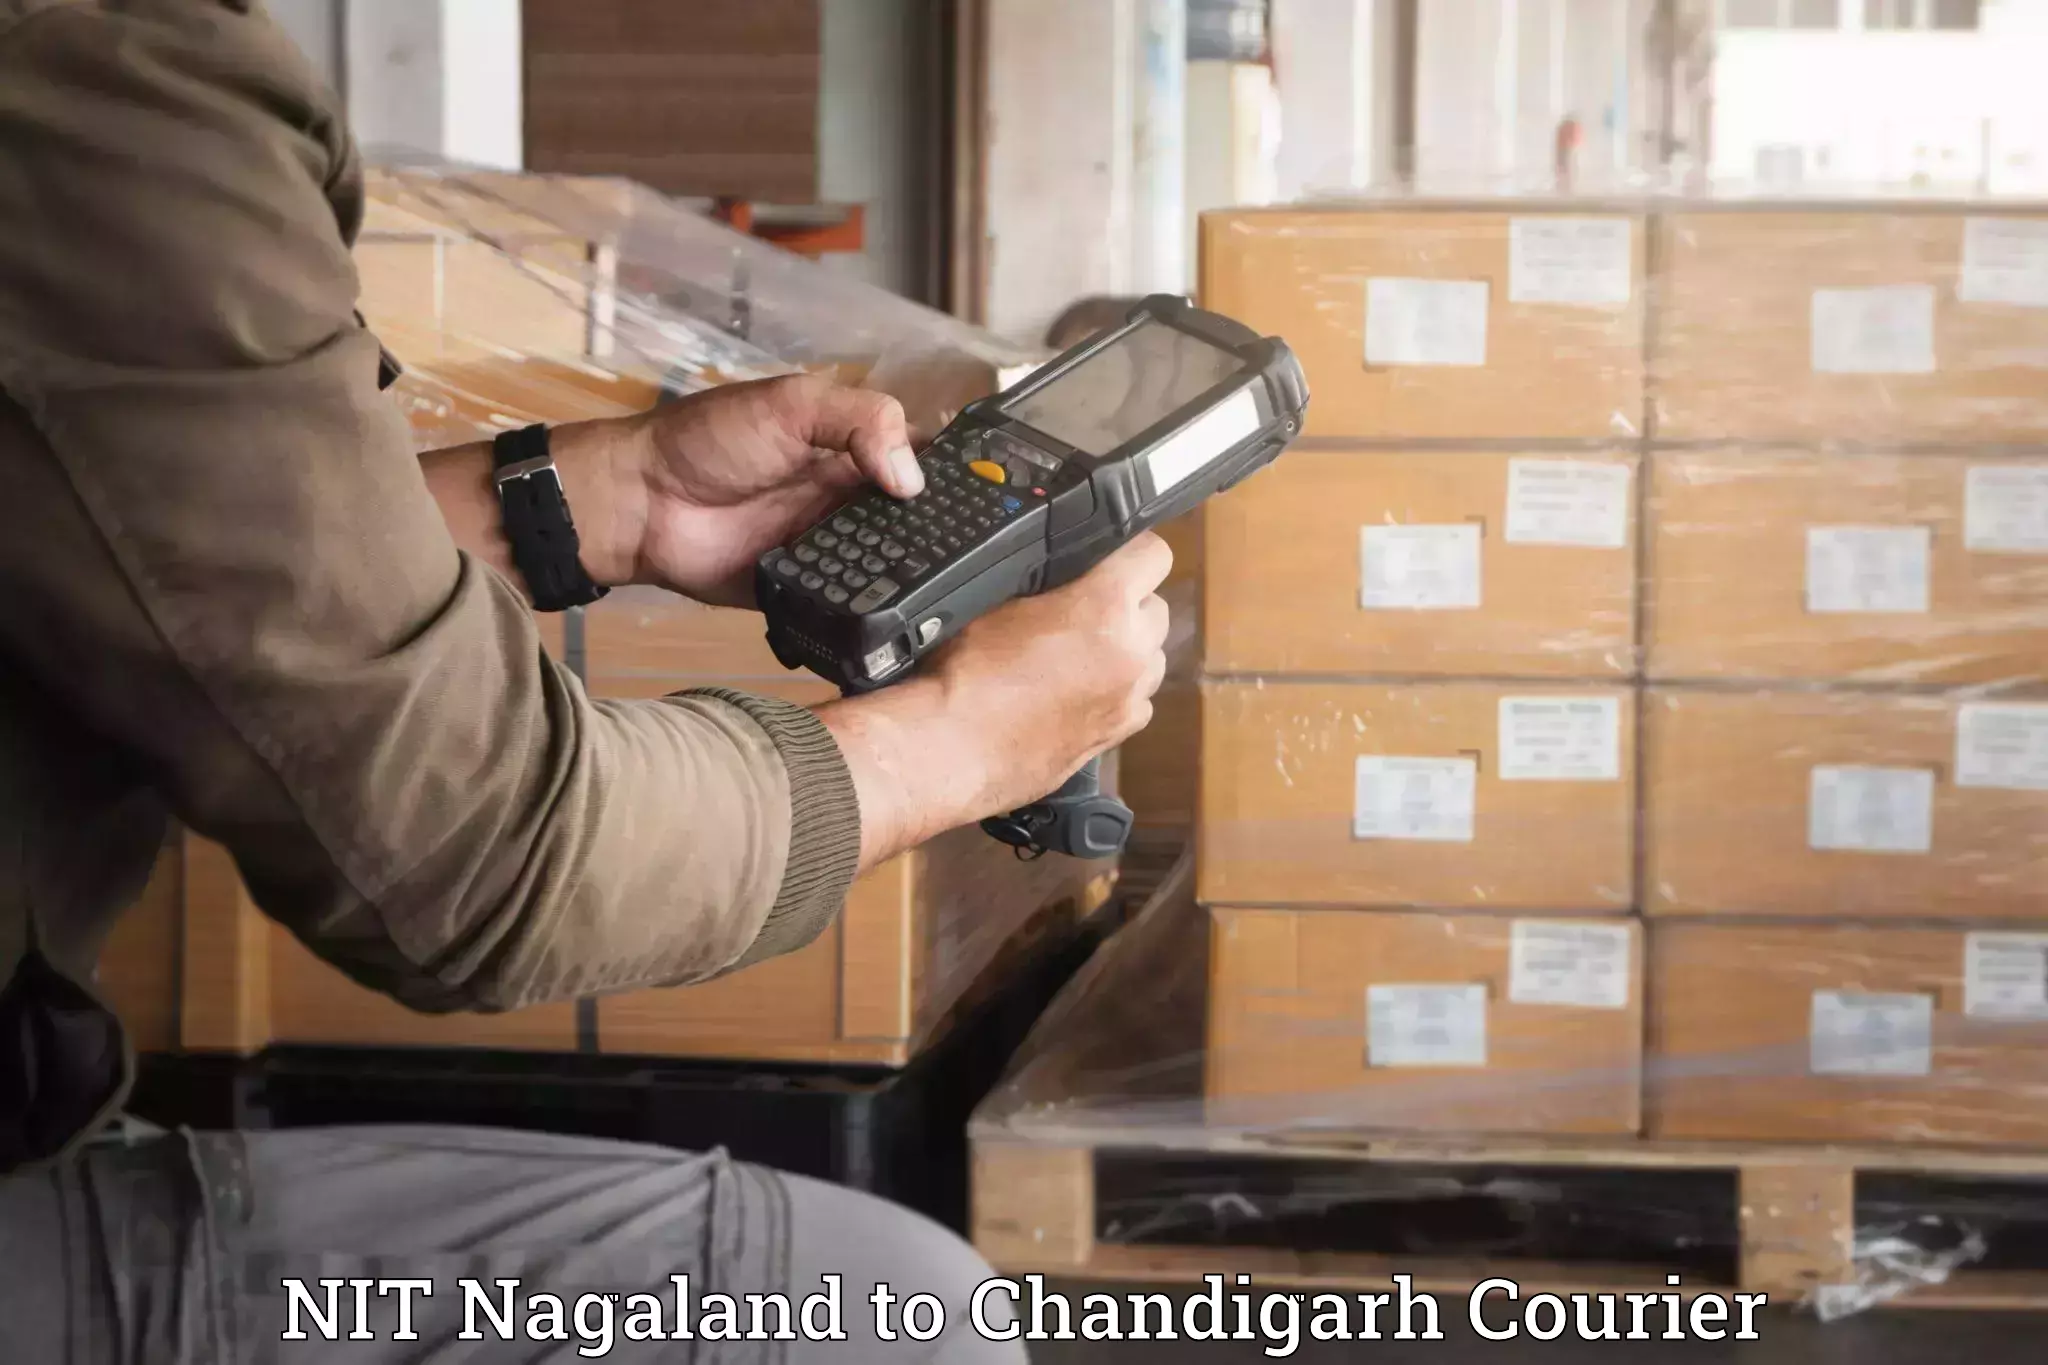 Quality moving services NIT Nagaland to Chandigarh